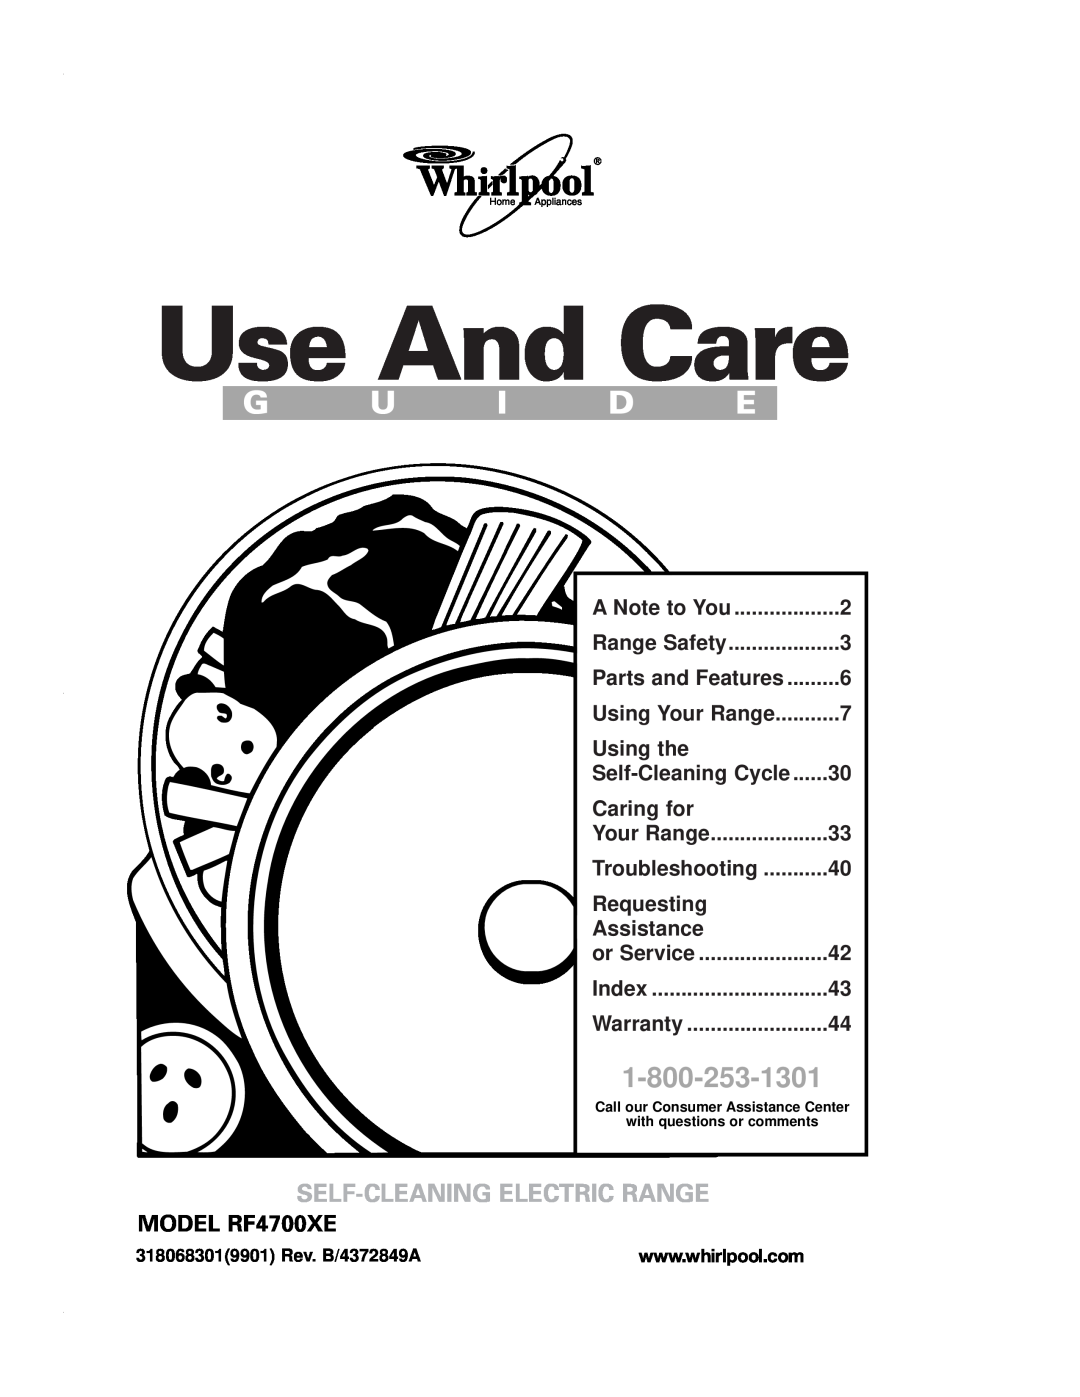 Whirlpool RF4700XE warranty Range Safety, Using the, Self-CleaningCycle, Caring for, Your Range, Troubleshooting, Index 